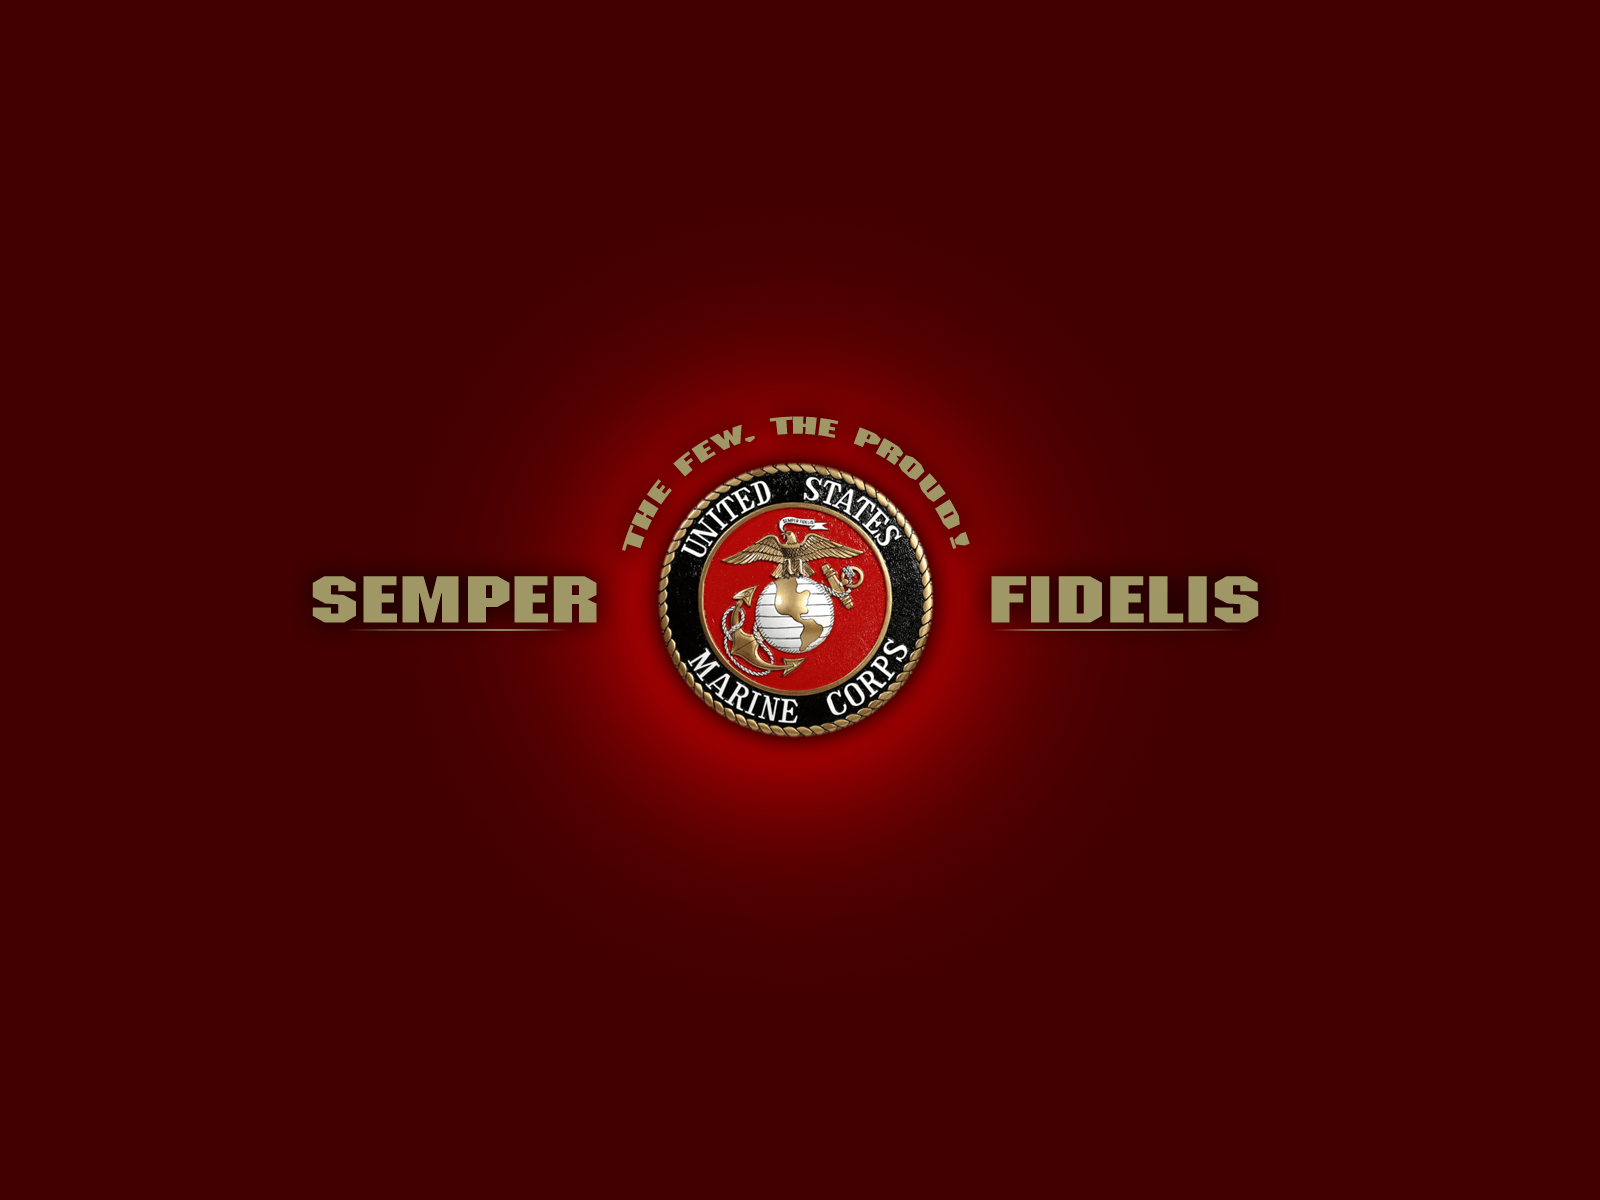 United States Marine Corps Wallpapers - Wallpaper Cave